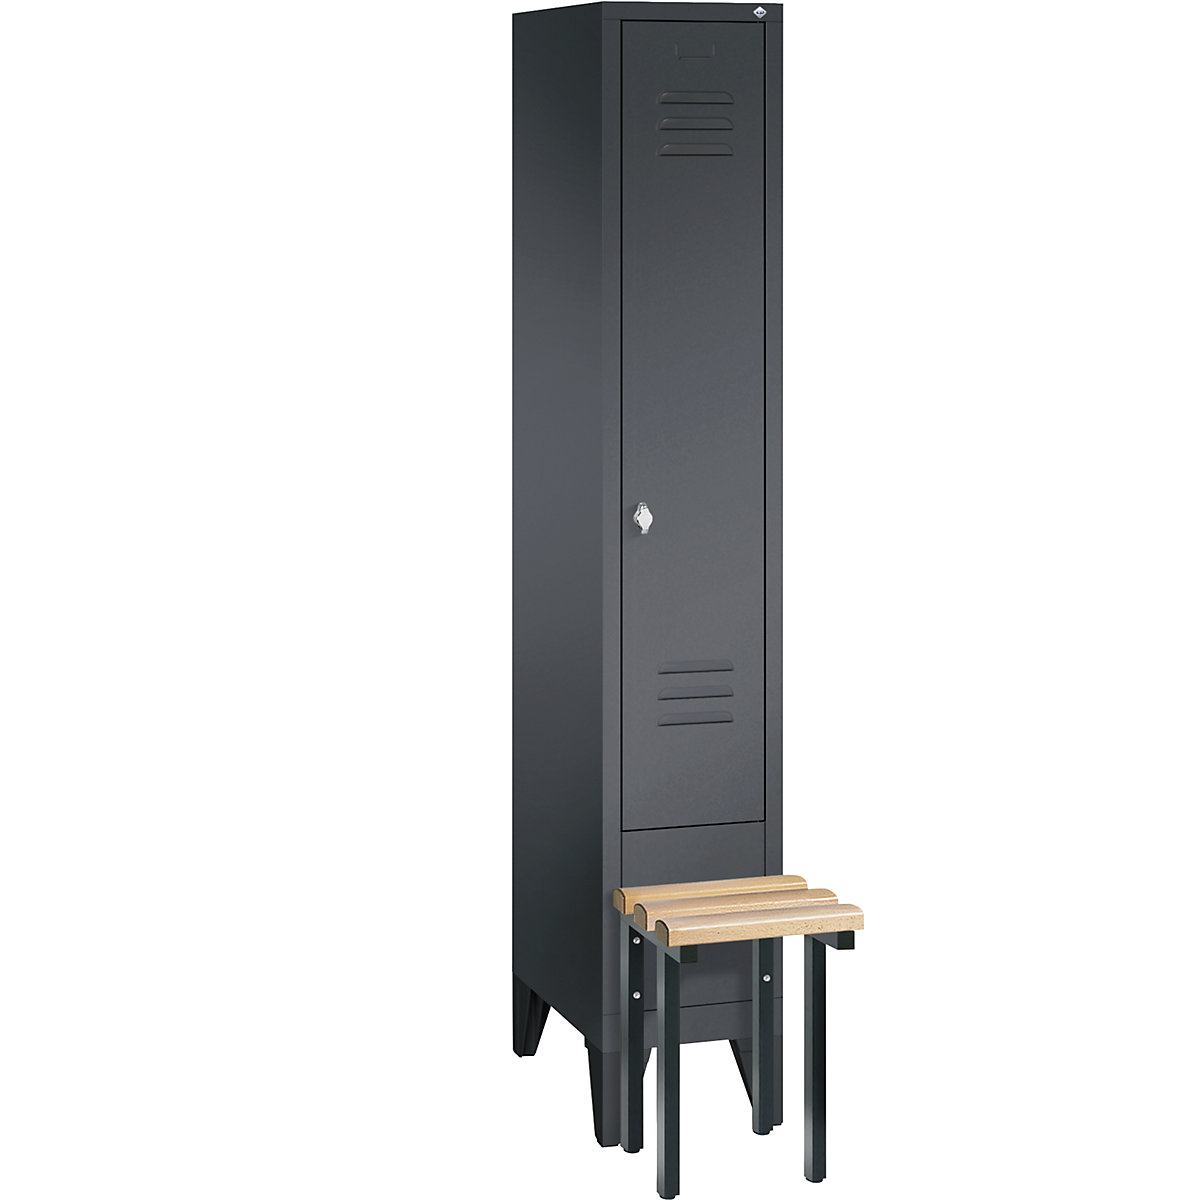 CLASSIC cloakroom locker with bench mounted in front – C+P, 1 compartment, compartment width 300 mm, black grey-7